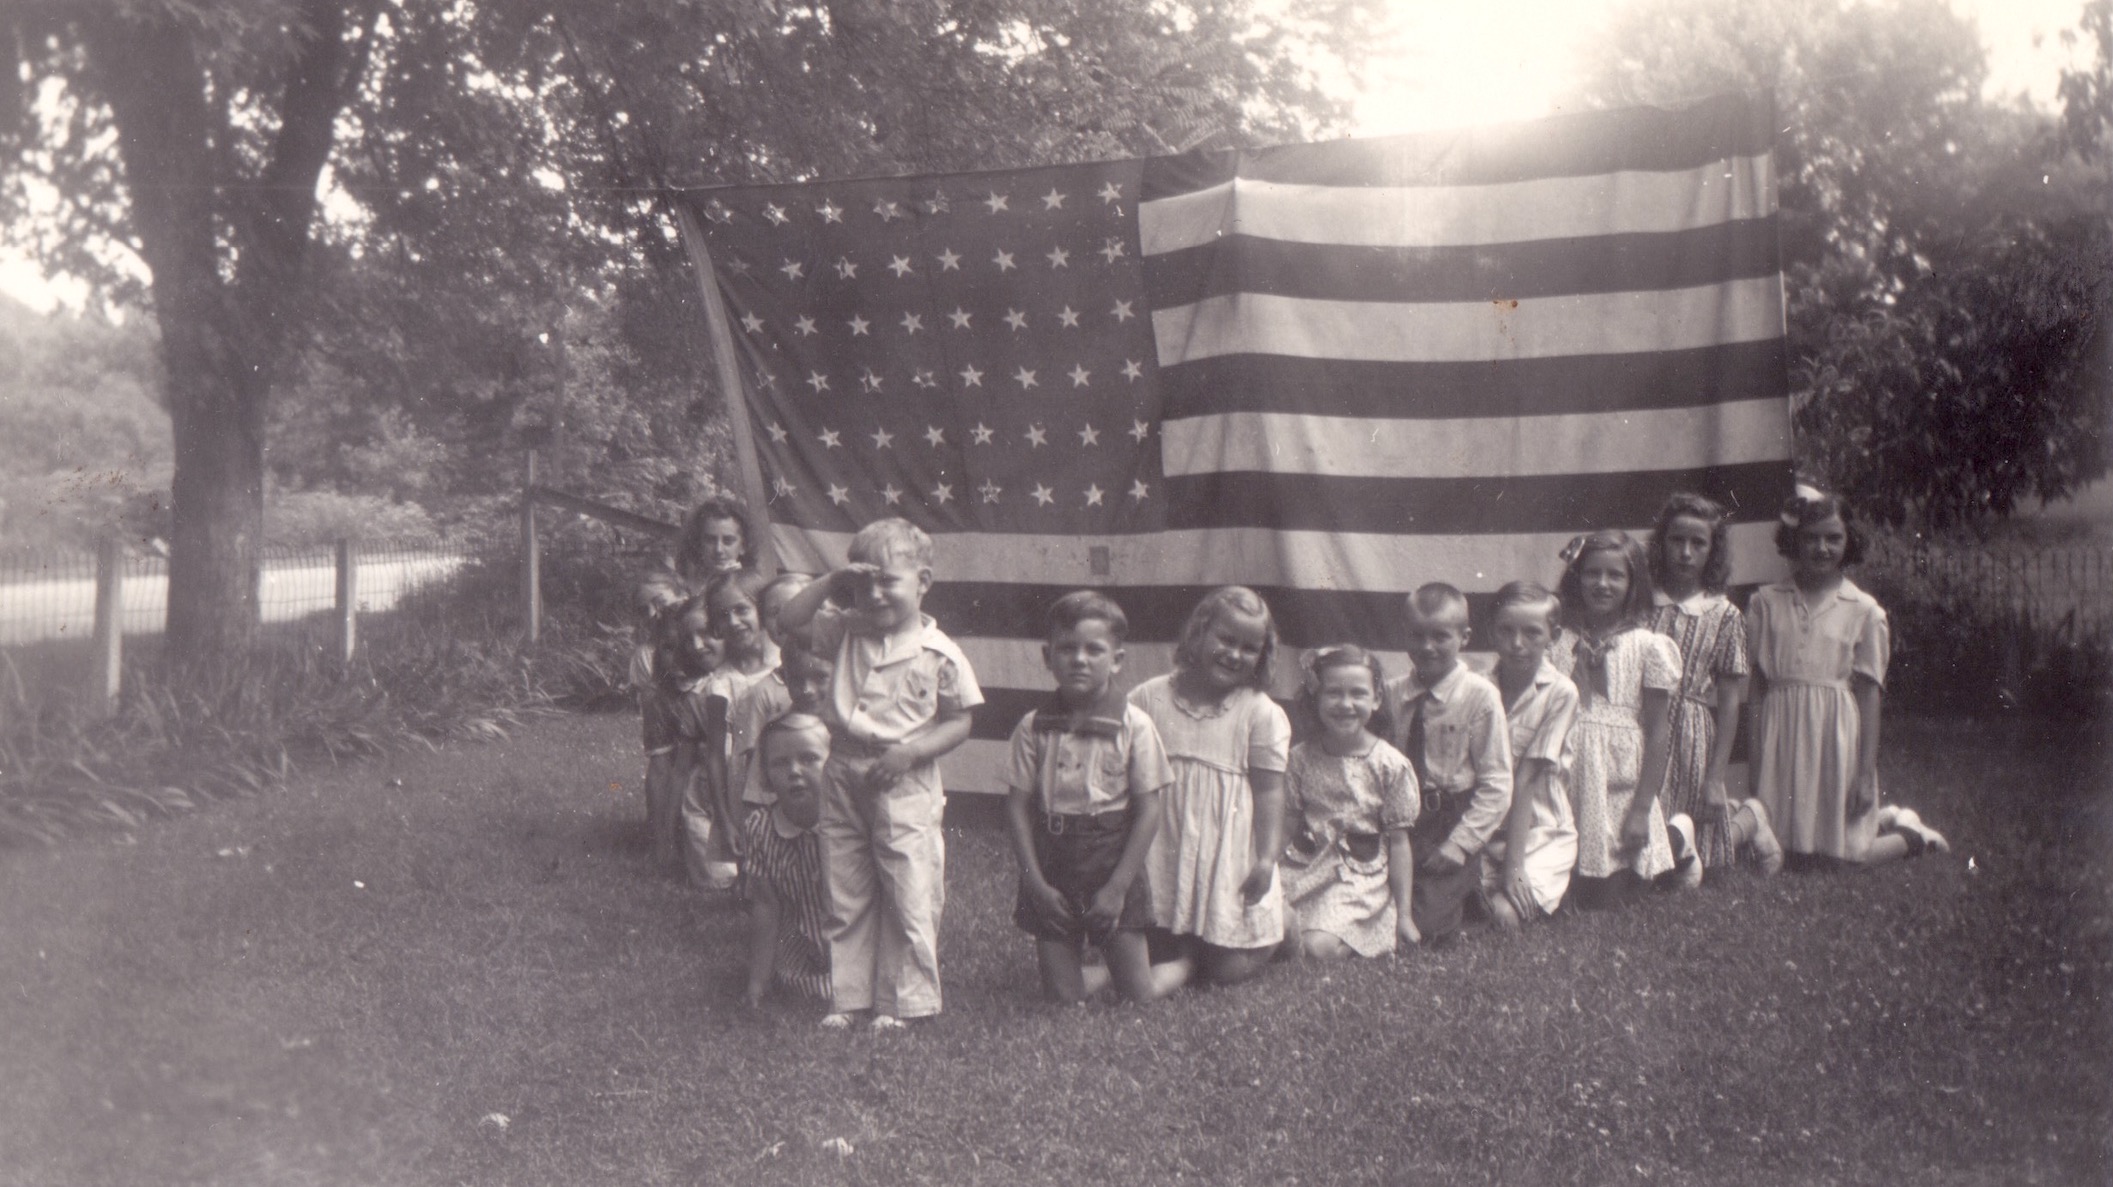 K.C. Potter leading the pledge of allegiance during WWII in front of a group of unknown children, Fallsburg, KY. 